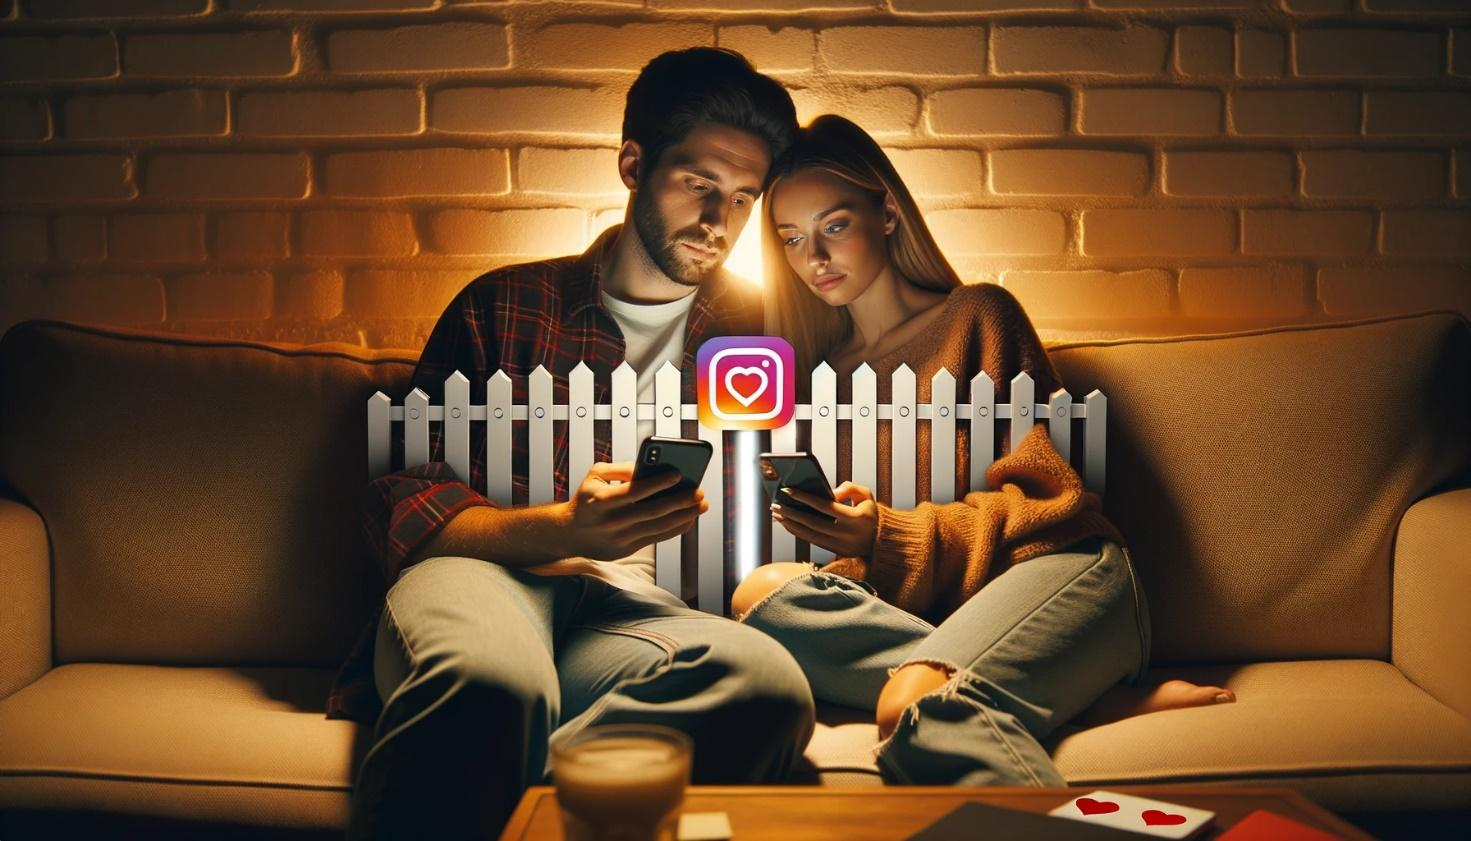 How I Learned to Save Relationships From Instagram's Harms